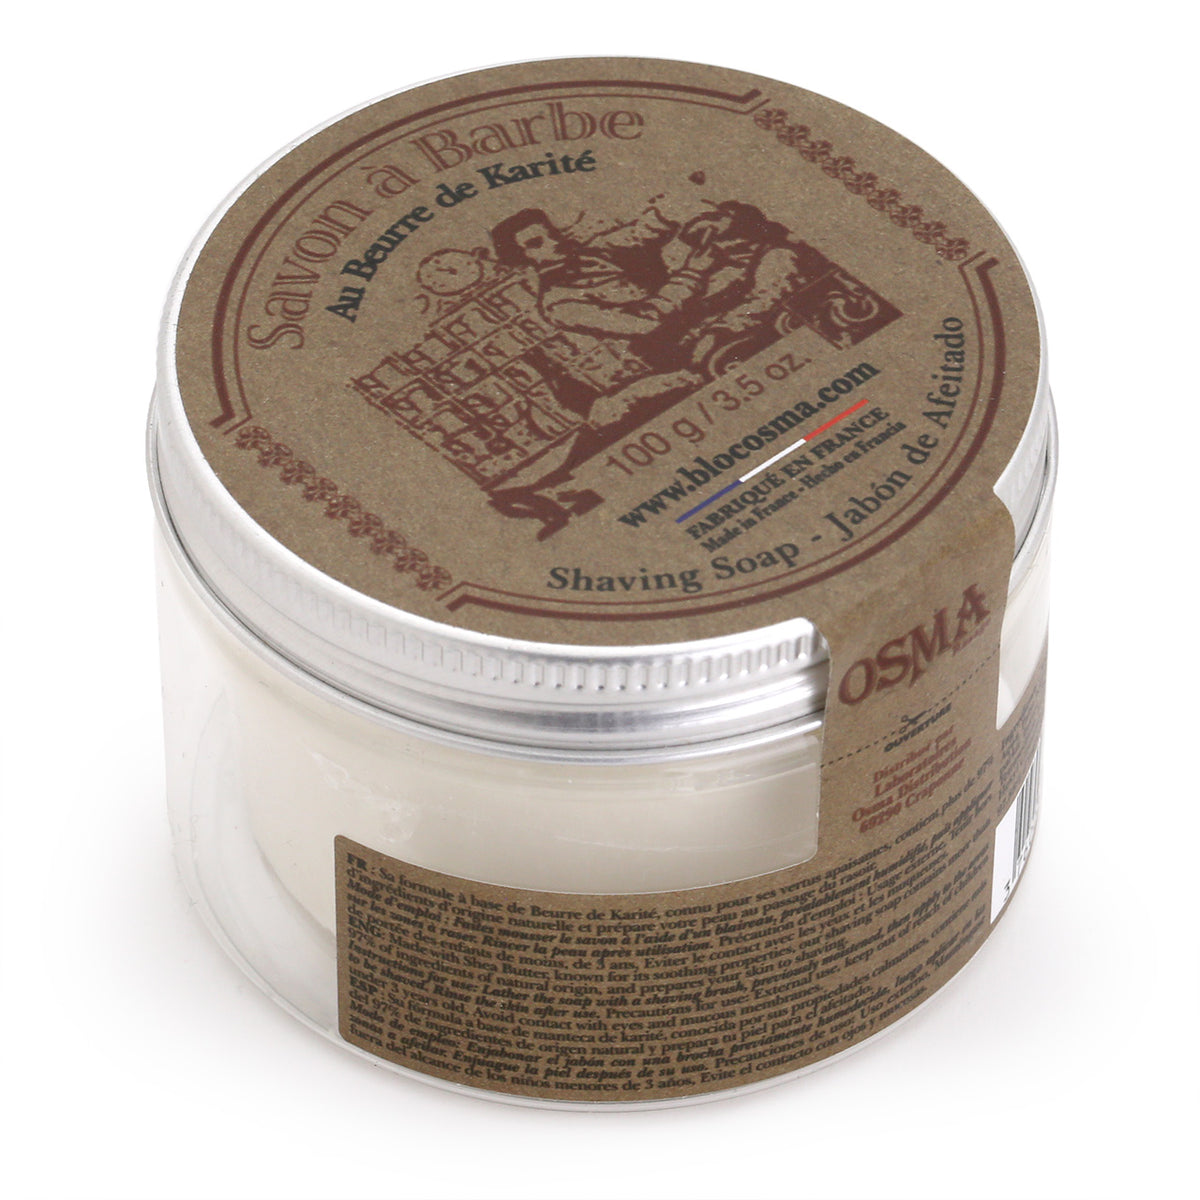 Osma Shaving Soap container is clear PET container with metal screw-on lid and printed kraft paper label